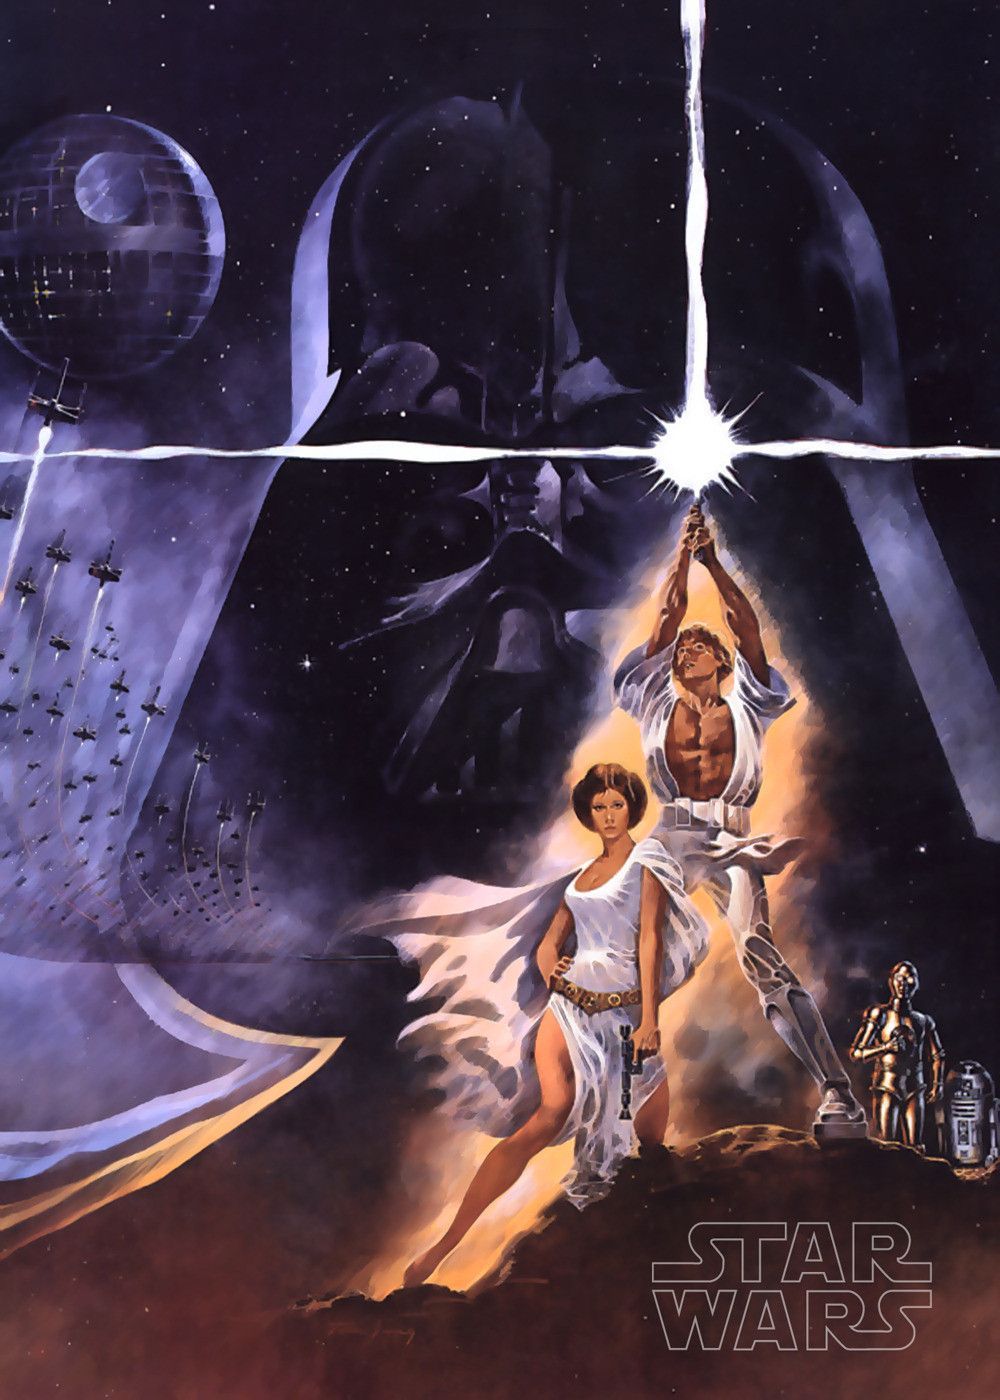 Star Wars: Episode IV New Hope. Star wars movies posters